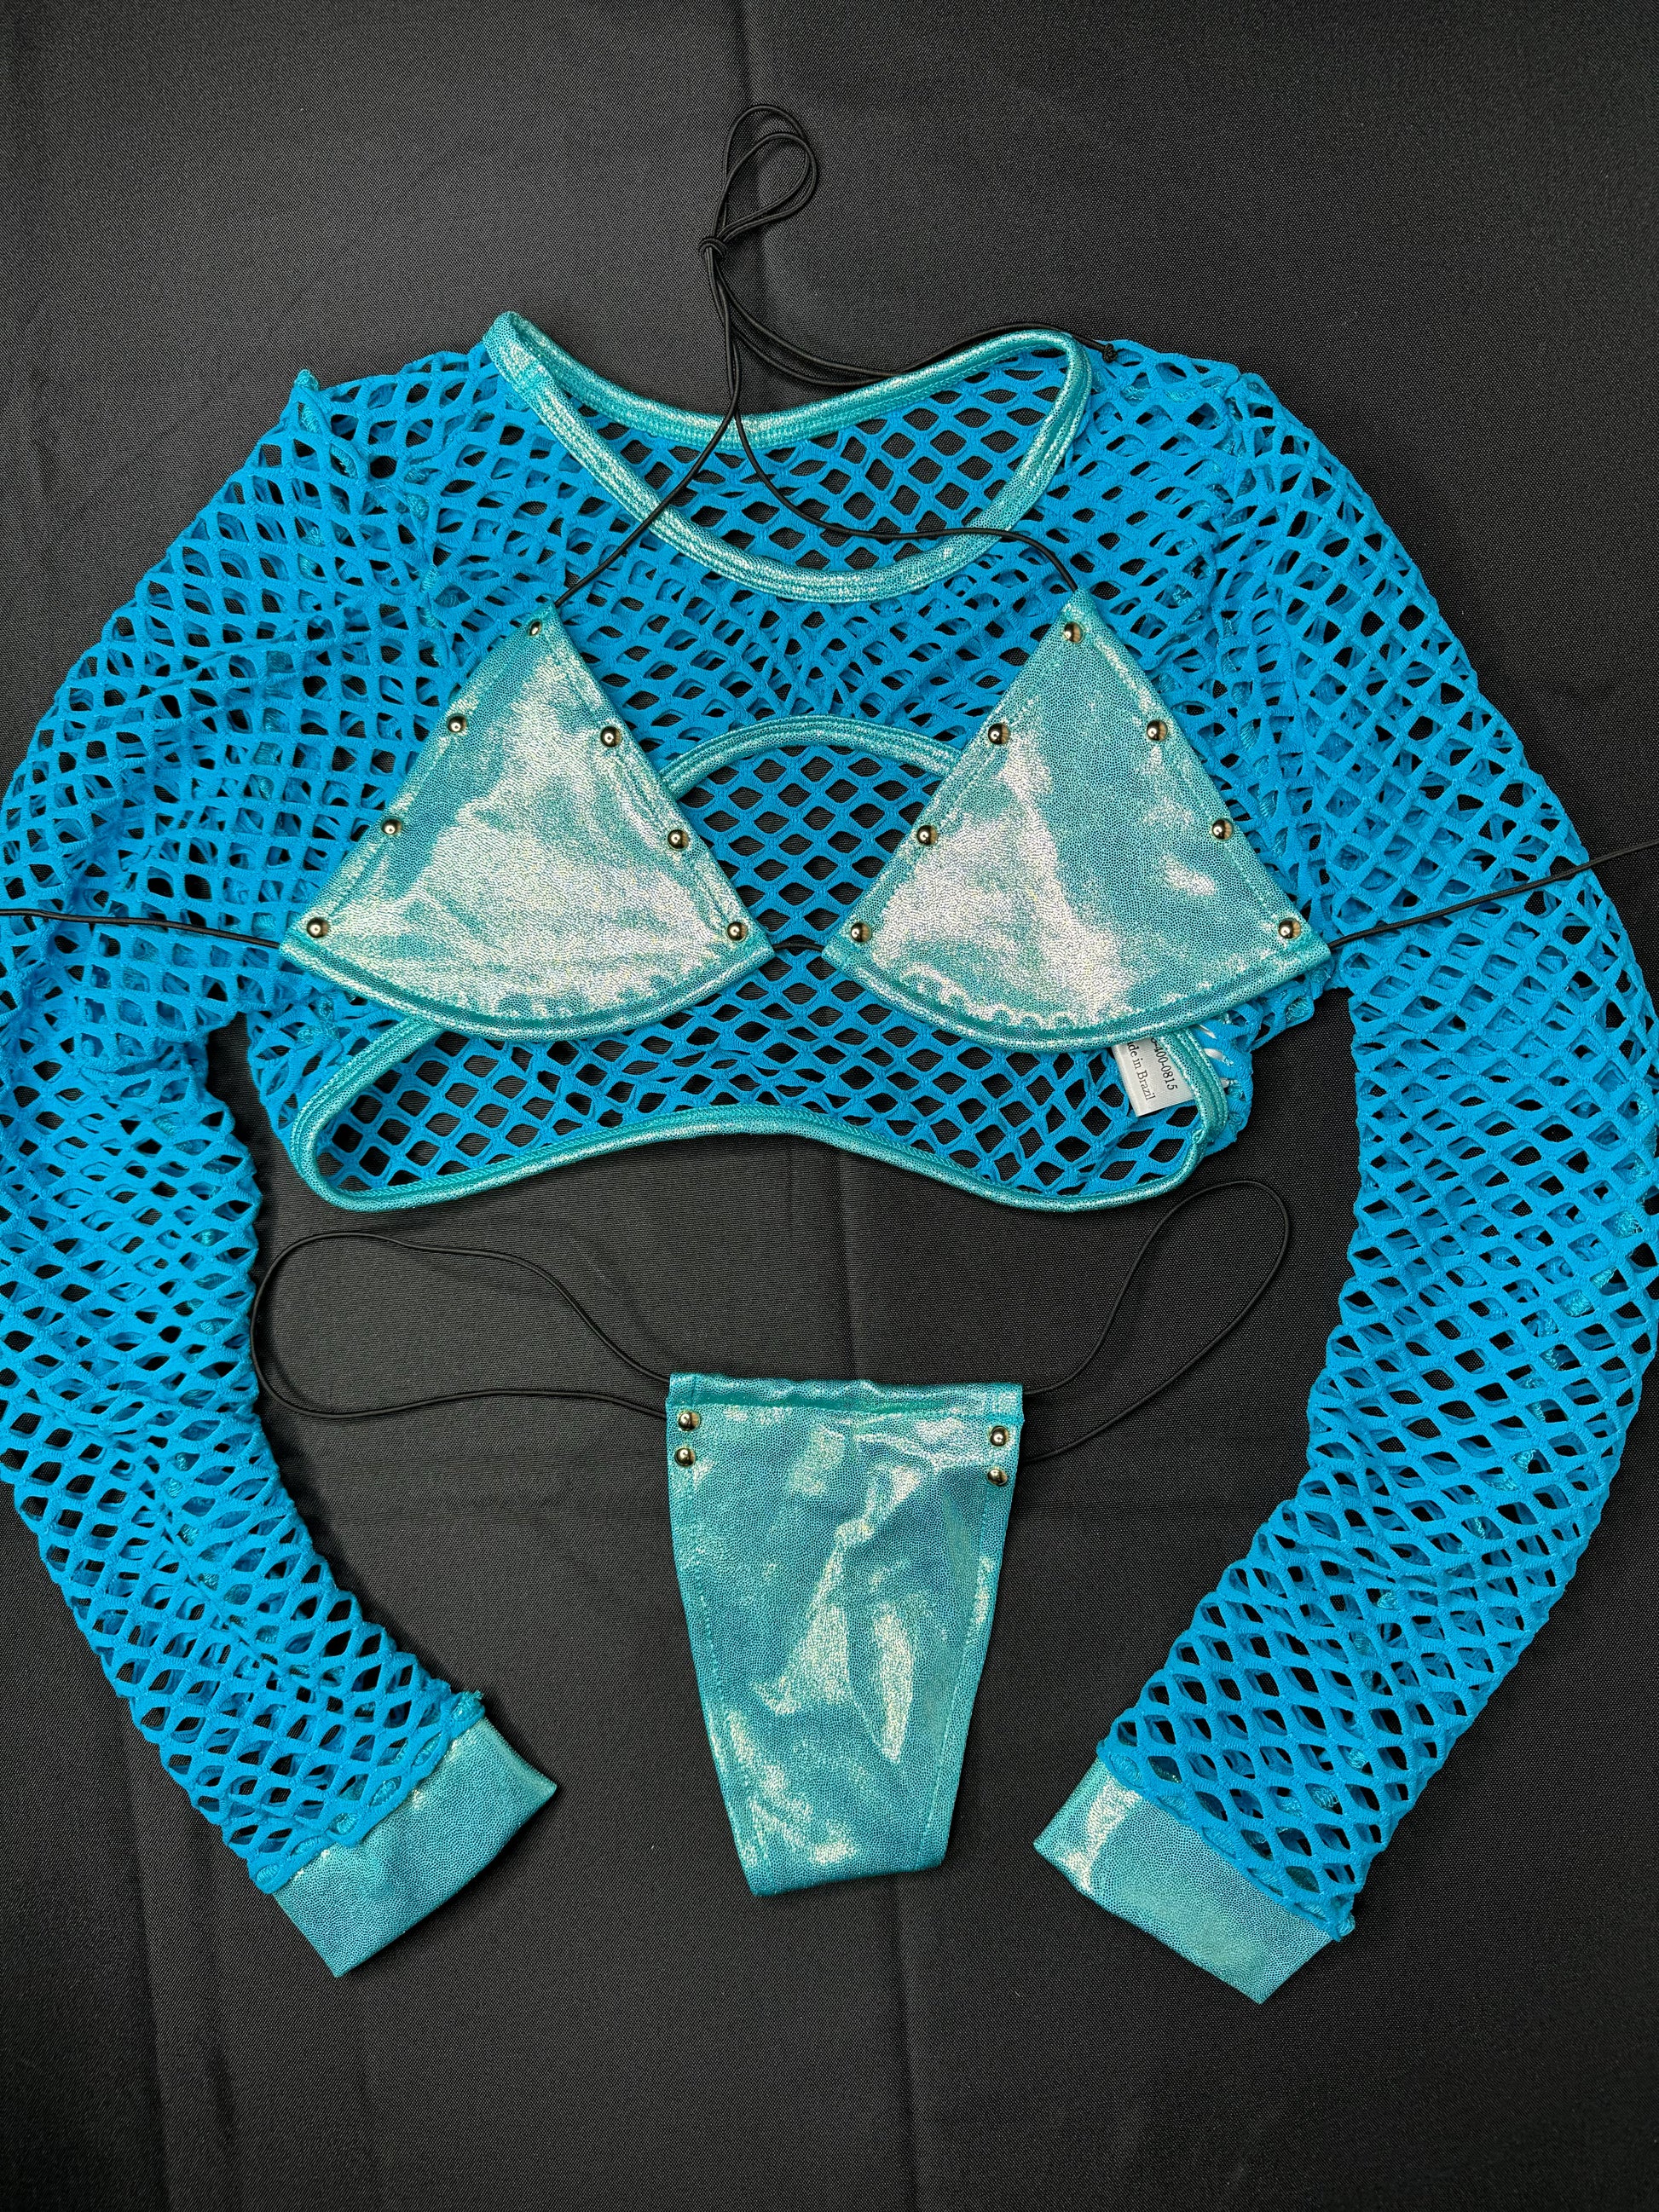 Metallic Turquoise/Fishnet Three-Piece Exotic Dancer Outfit